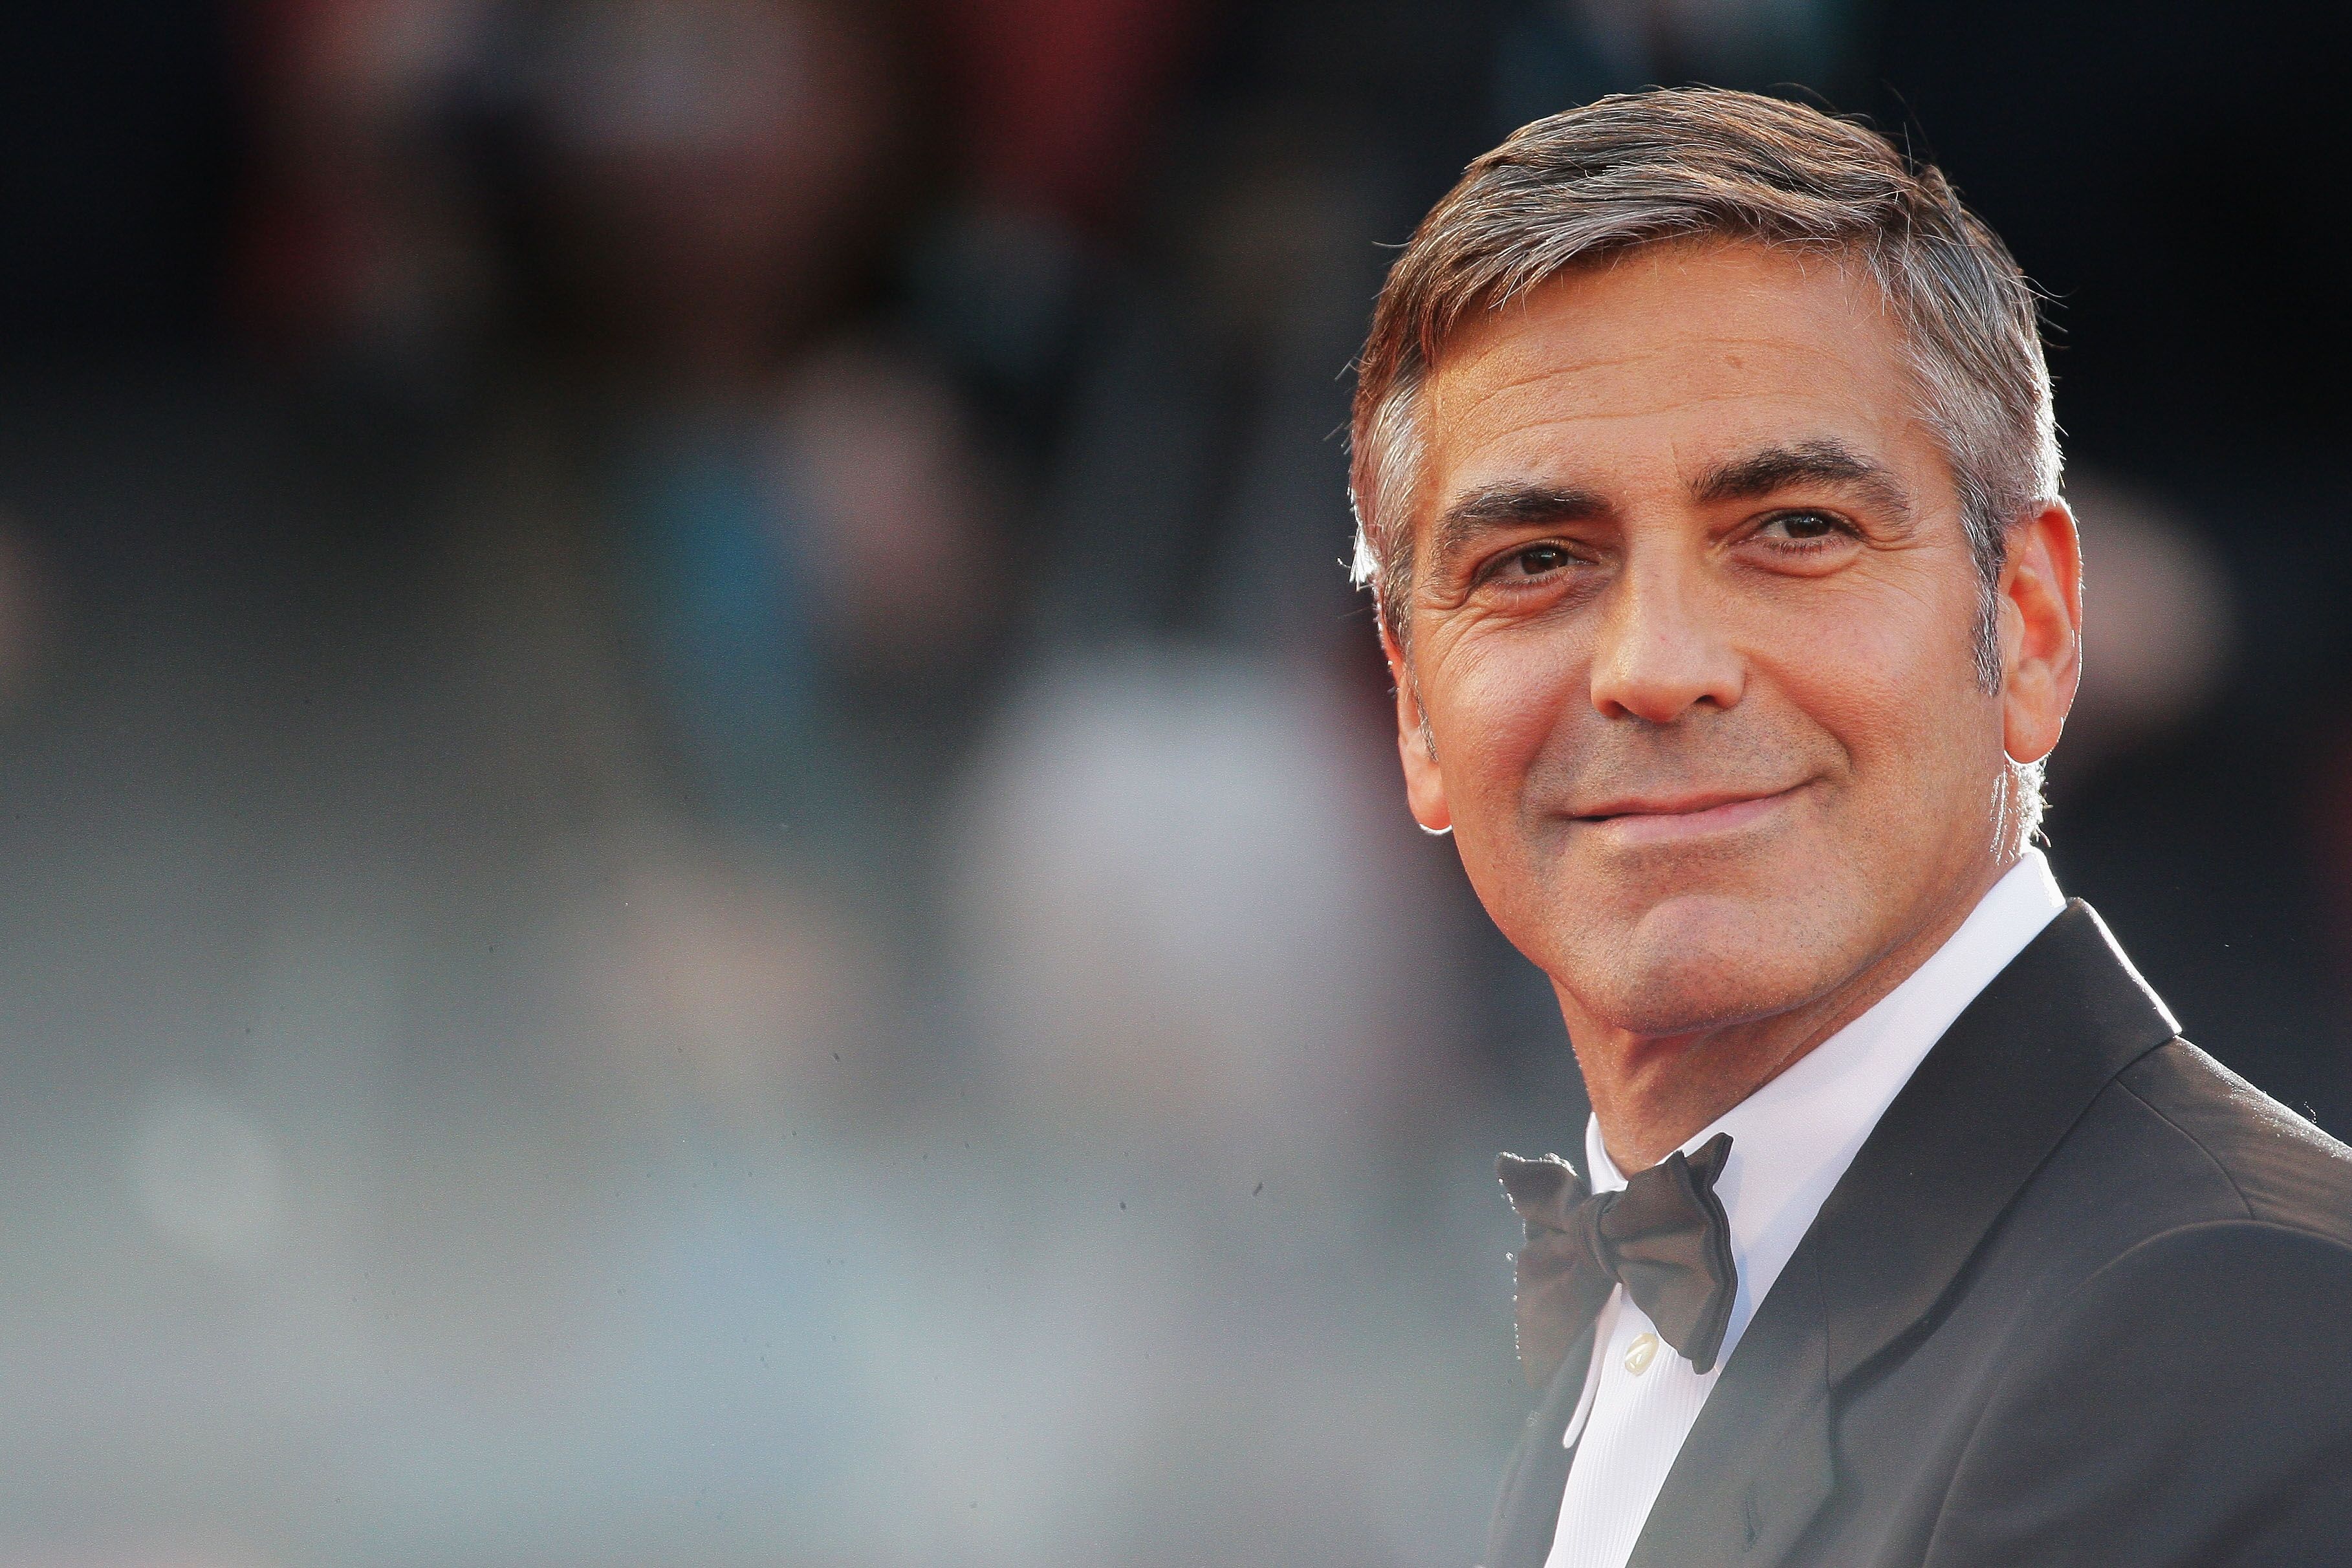 George Clooney at "The Men Who Stare At Goats" premiere at the Sala Grande in 2009 | Photo: Getty Images